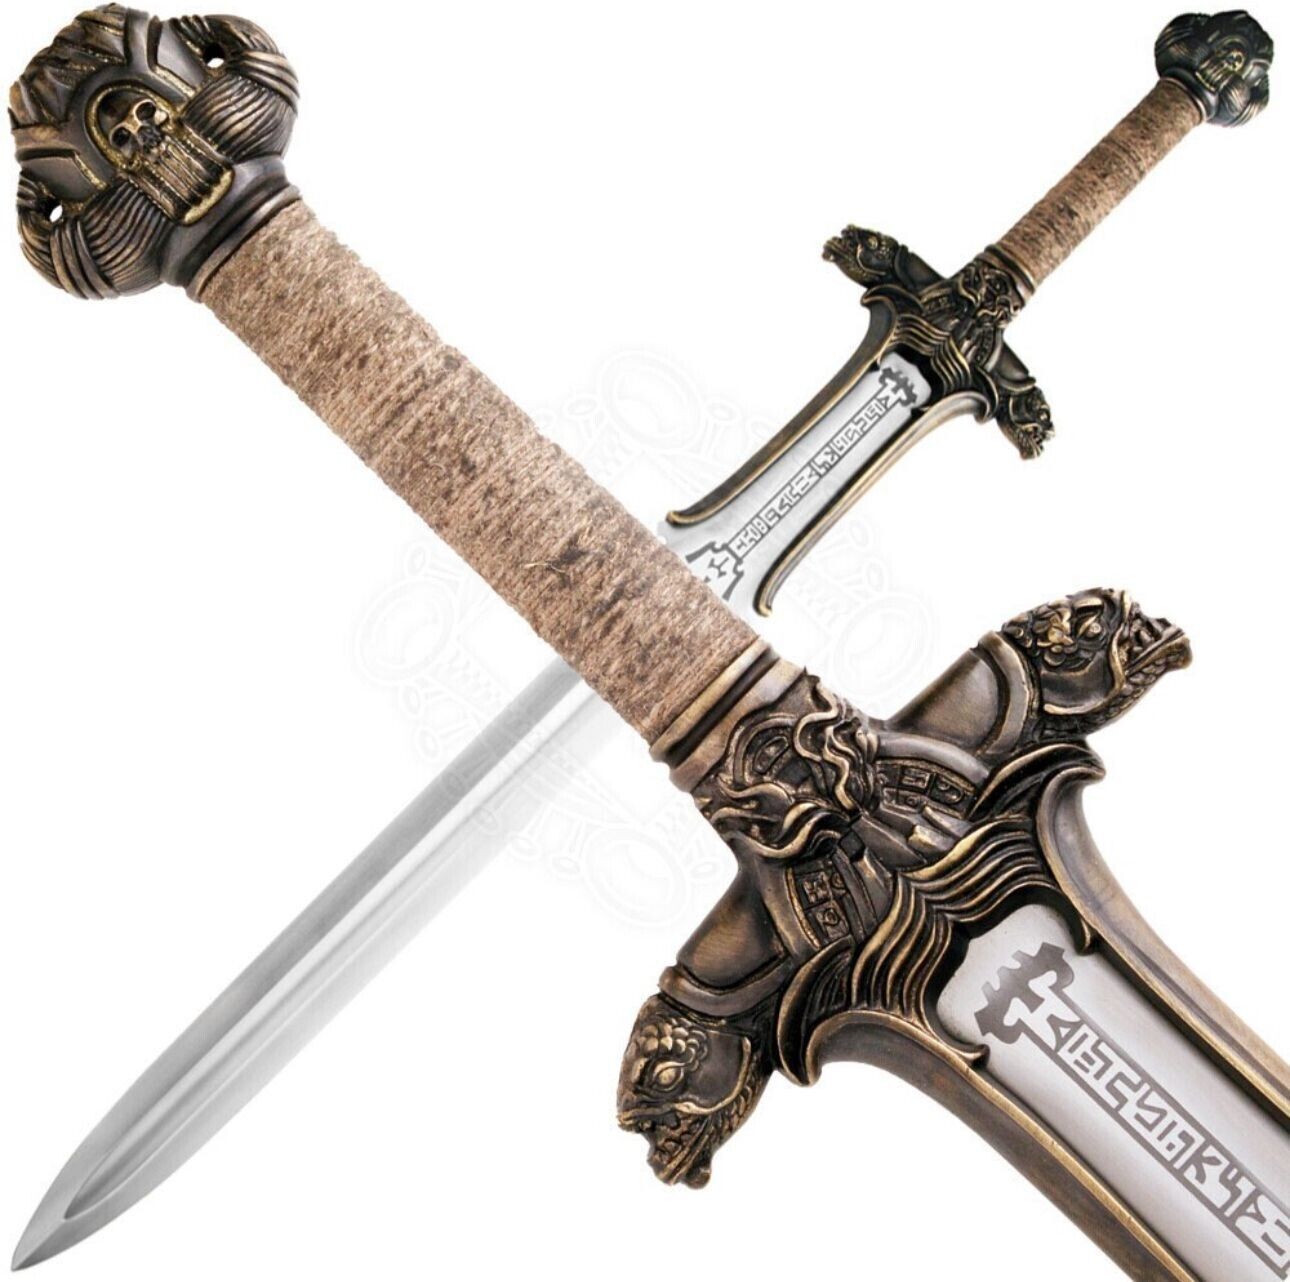 The Atlantean Sword From Conan the Barbarian Cimmerian Warrior Sword Hand-forged